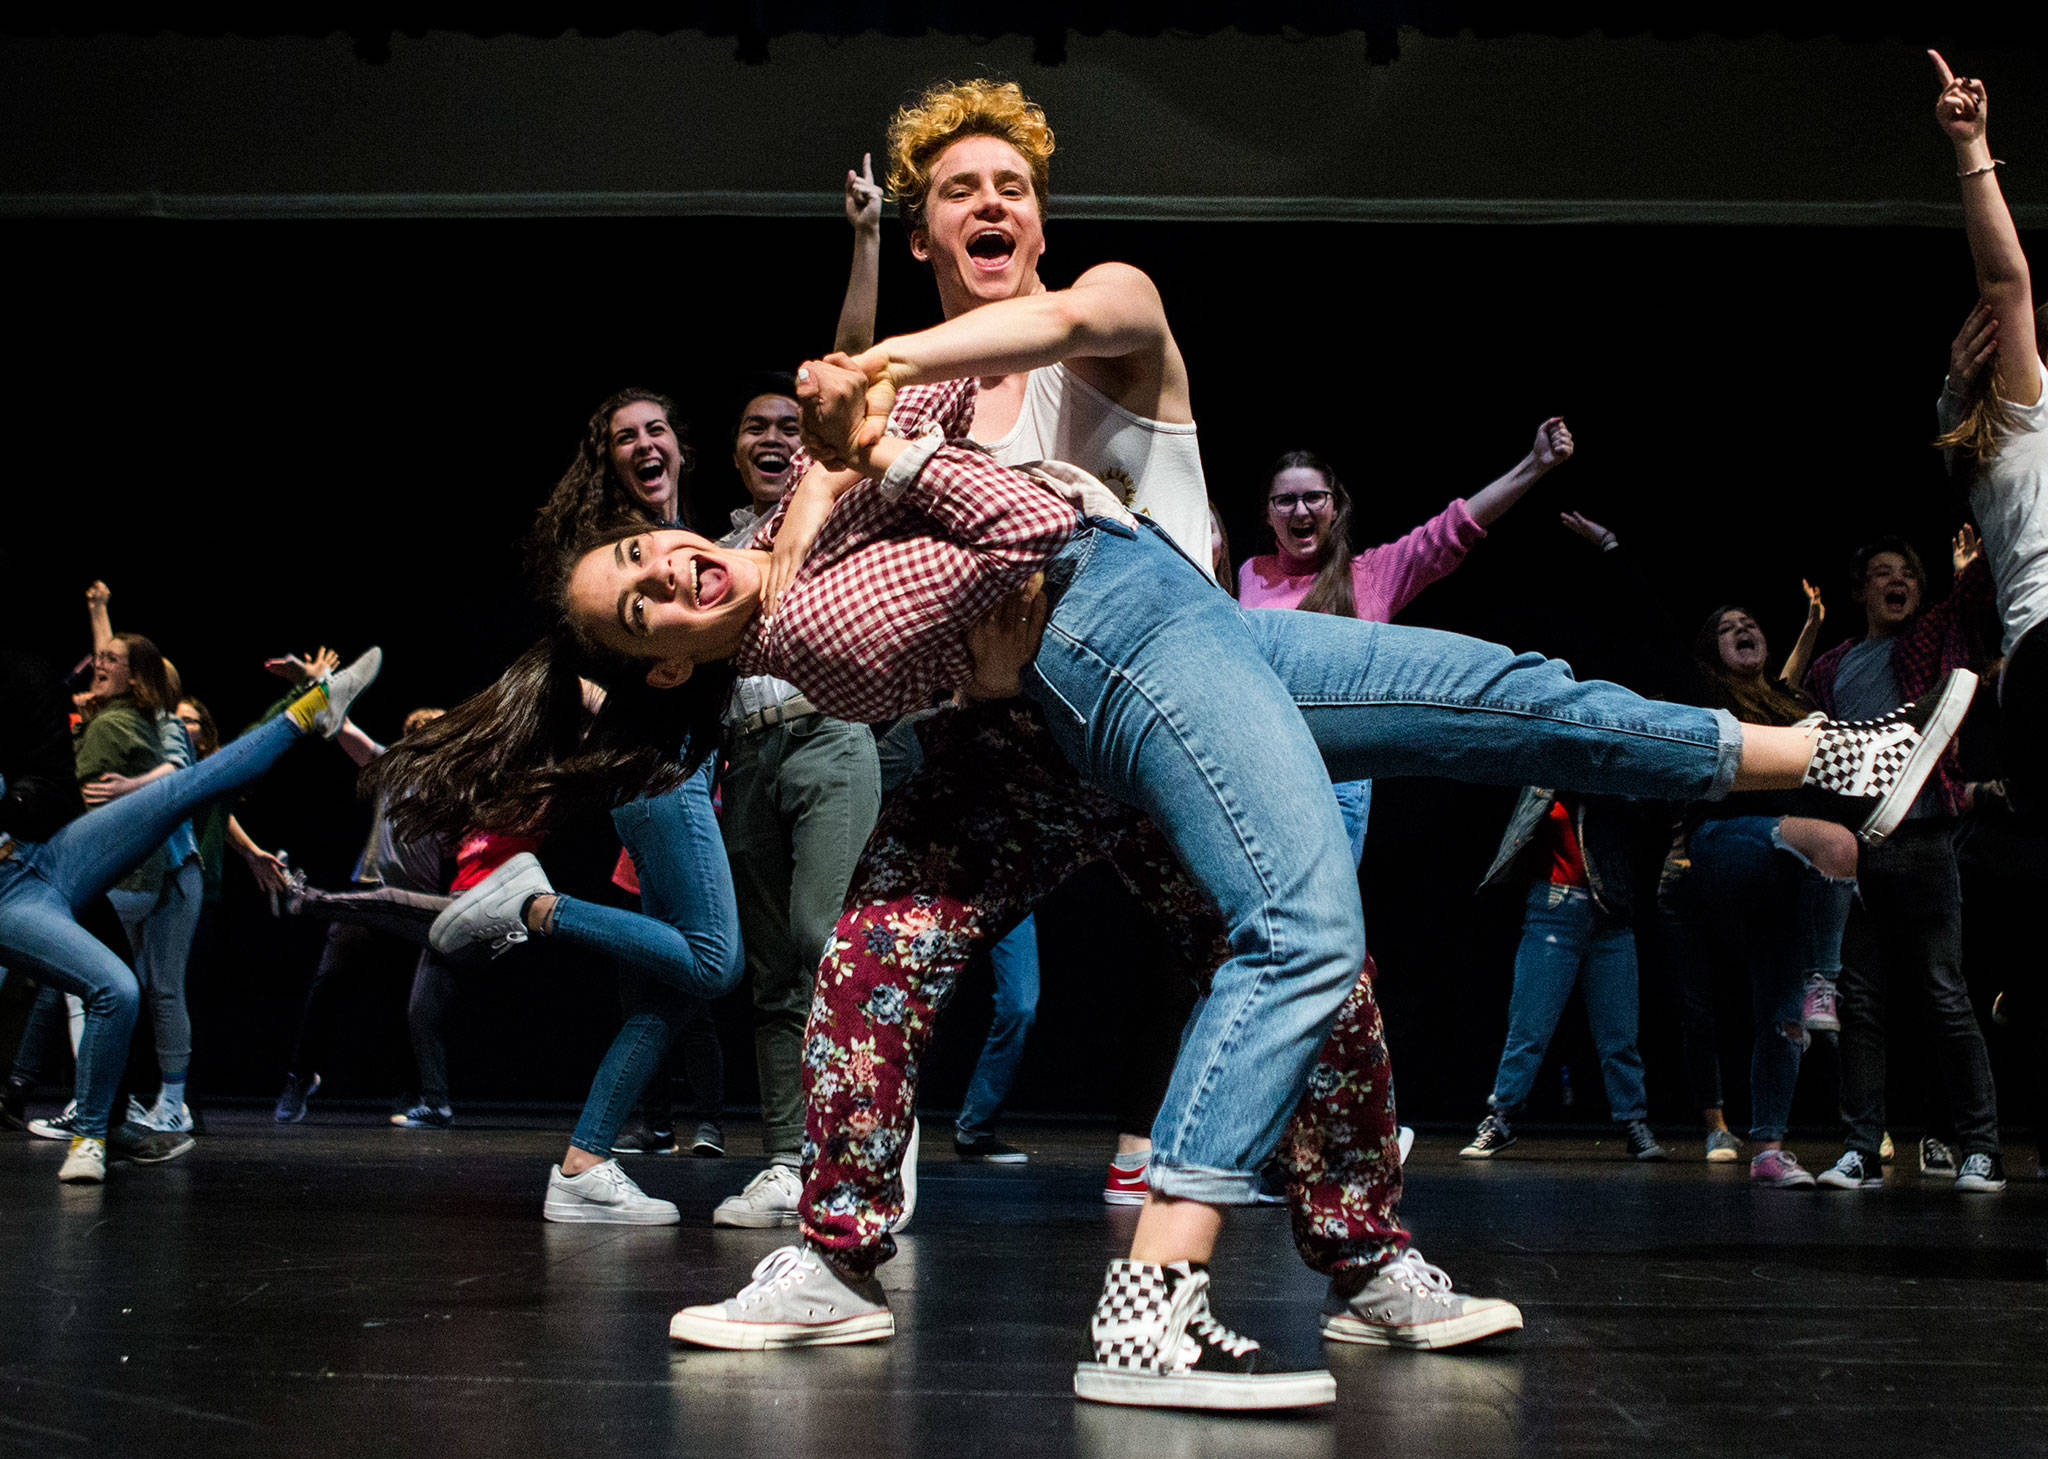 Toby Underhill, 17, who plays Ren McCormack and Natalie Mata, 15, as Ariel Moore, run through “The Finale” scene during a rehearsal of “Footloose” in the Everett Civic Auditorium. (Olivia Vanni / The Herald)